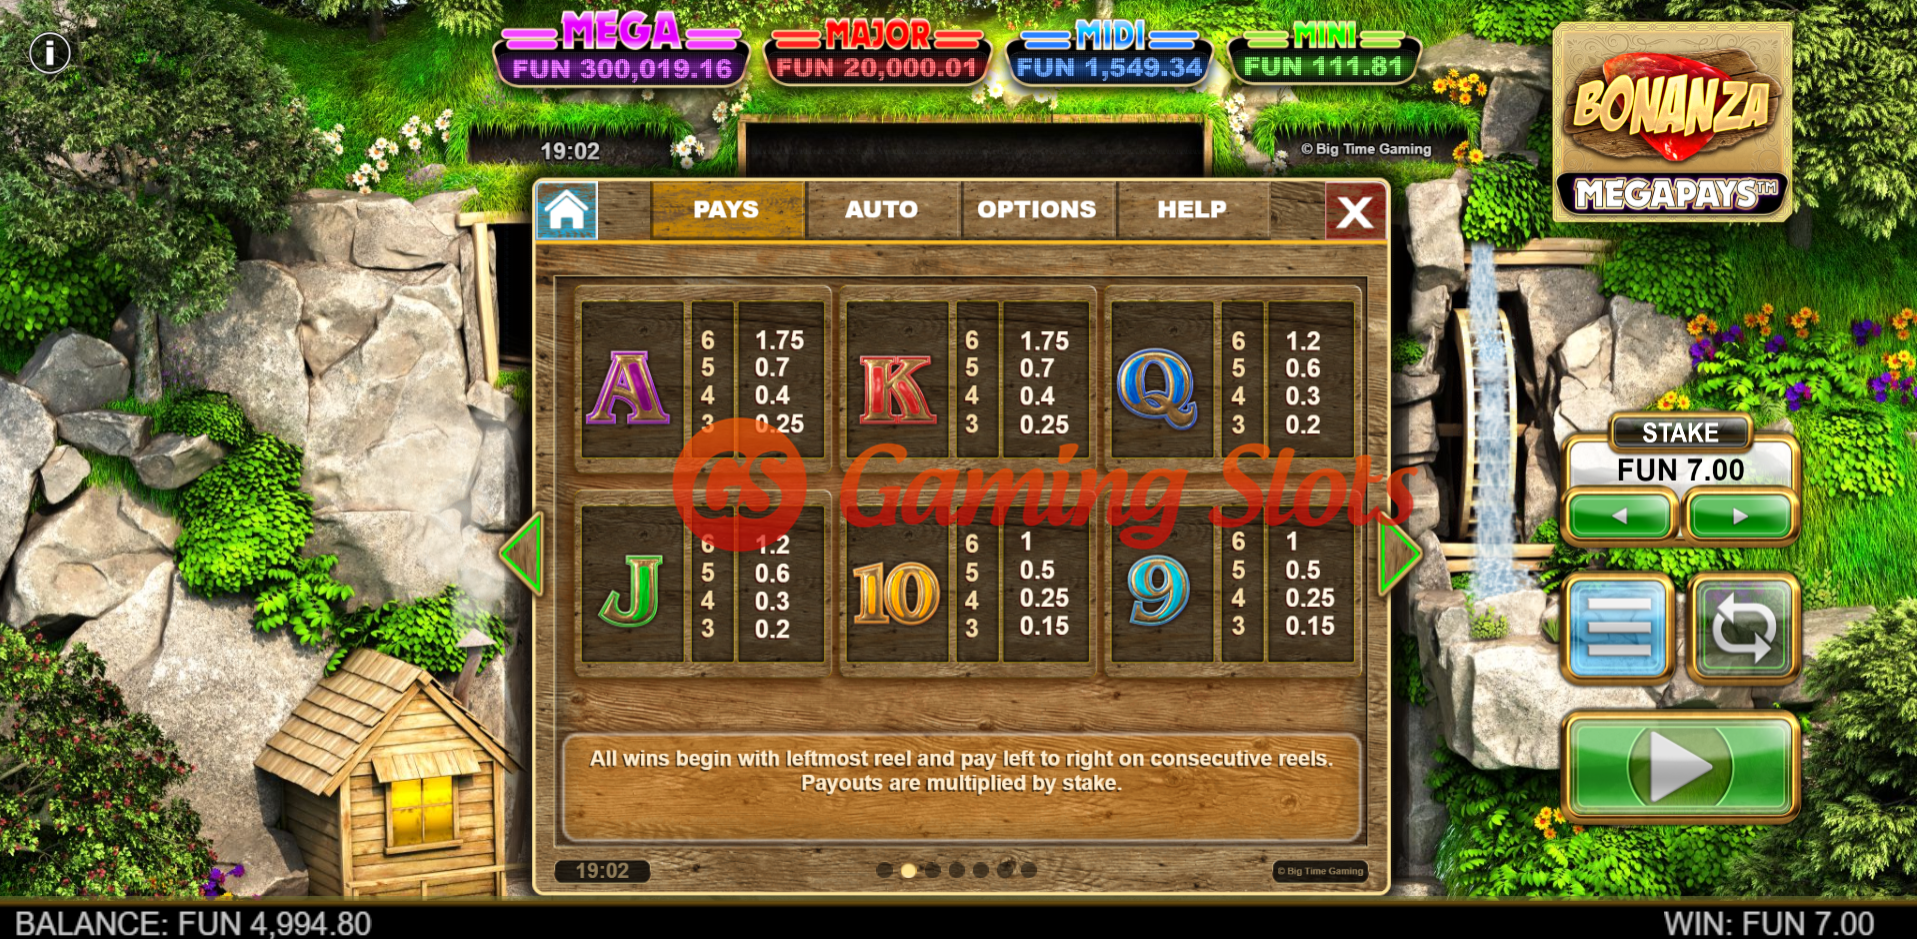 Pay Table for Bonanza Megapays slot from Big Time Gaming